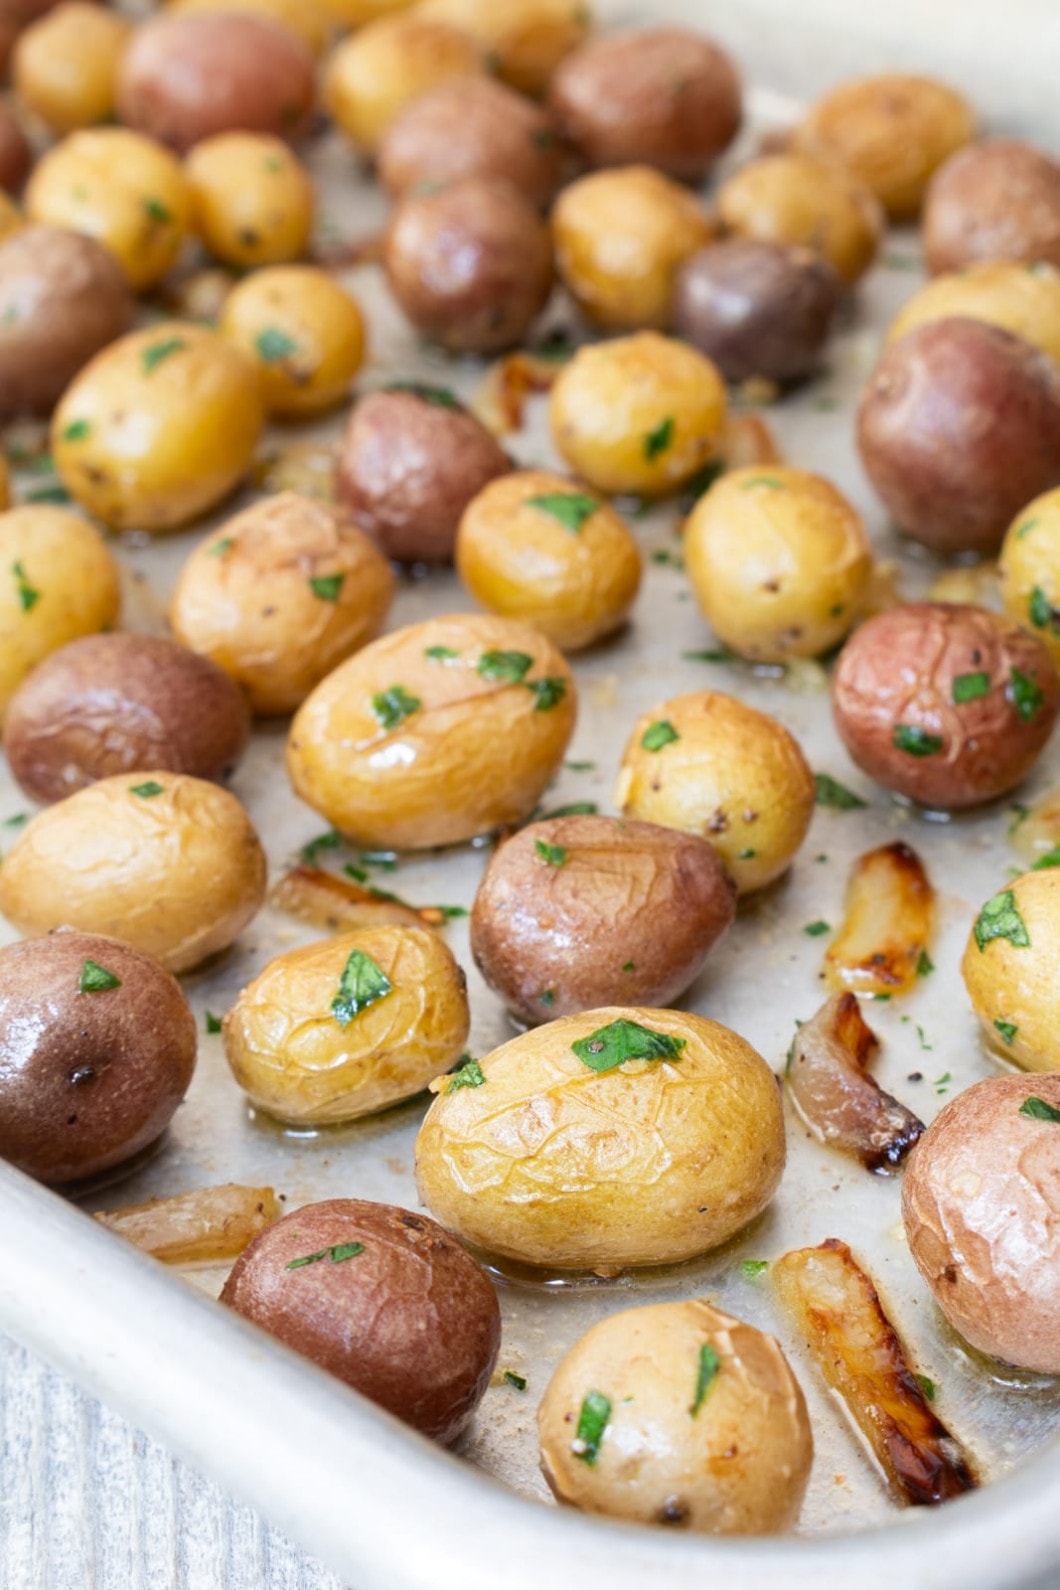 Tiny potatoes with garlic butter - Unpacked